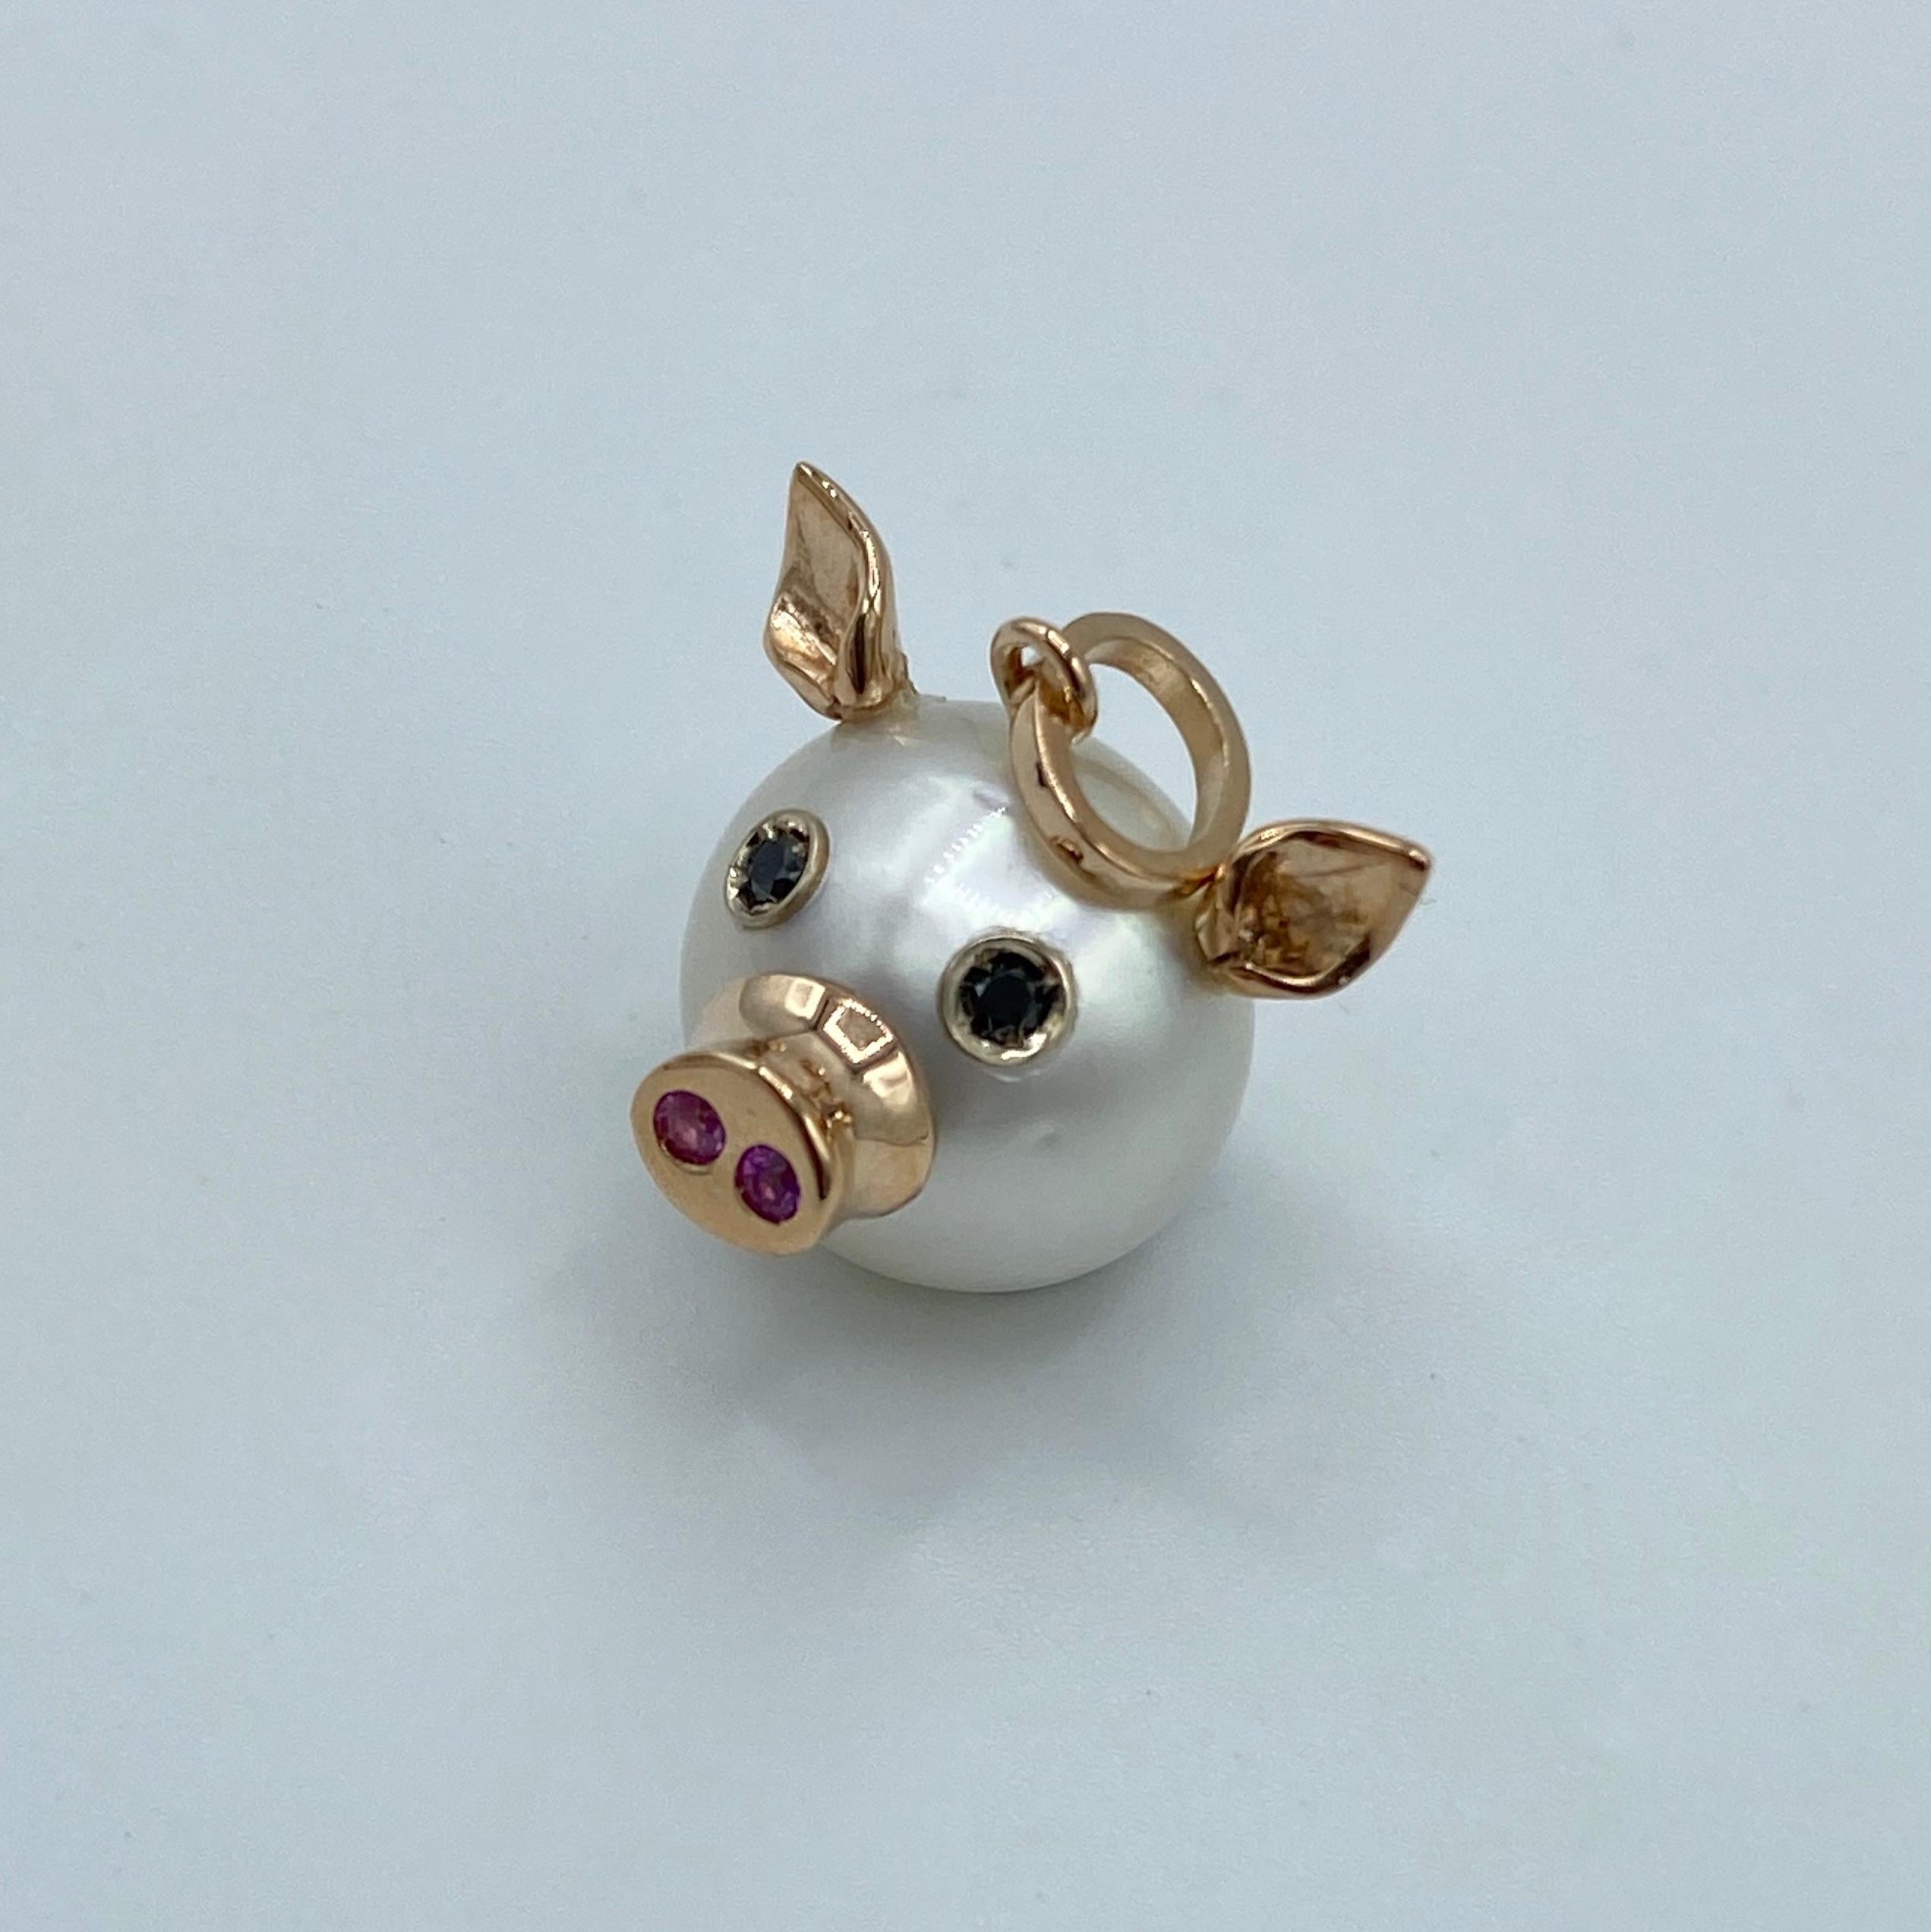 This nice pendant is made with a button Australian pearl. 
It has two ears, two eyes with black diamonds.  
In the holes of its nose there are two pink sapphires encrusted, in total ct 0.03.
All the particulars made in red gold excluding eyes.
The